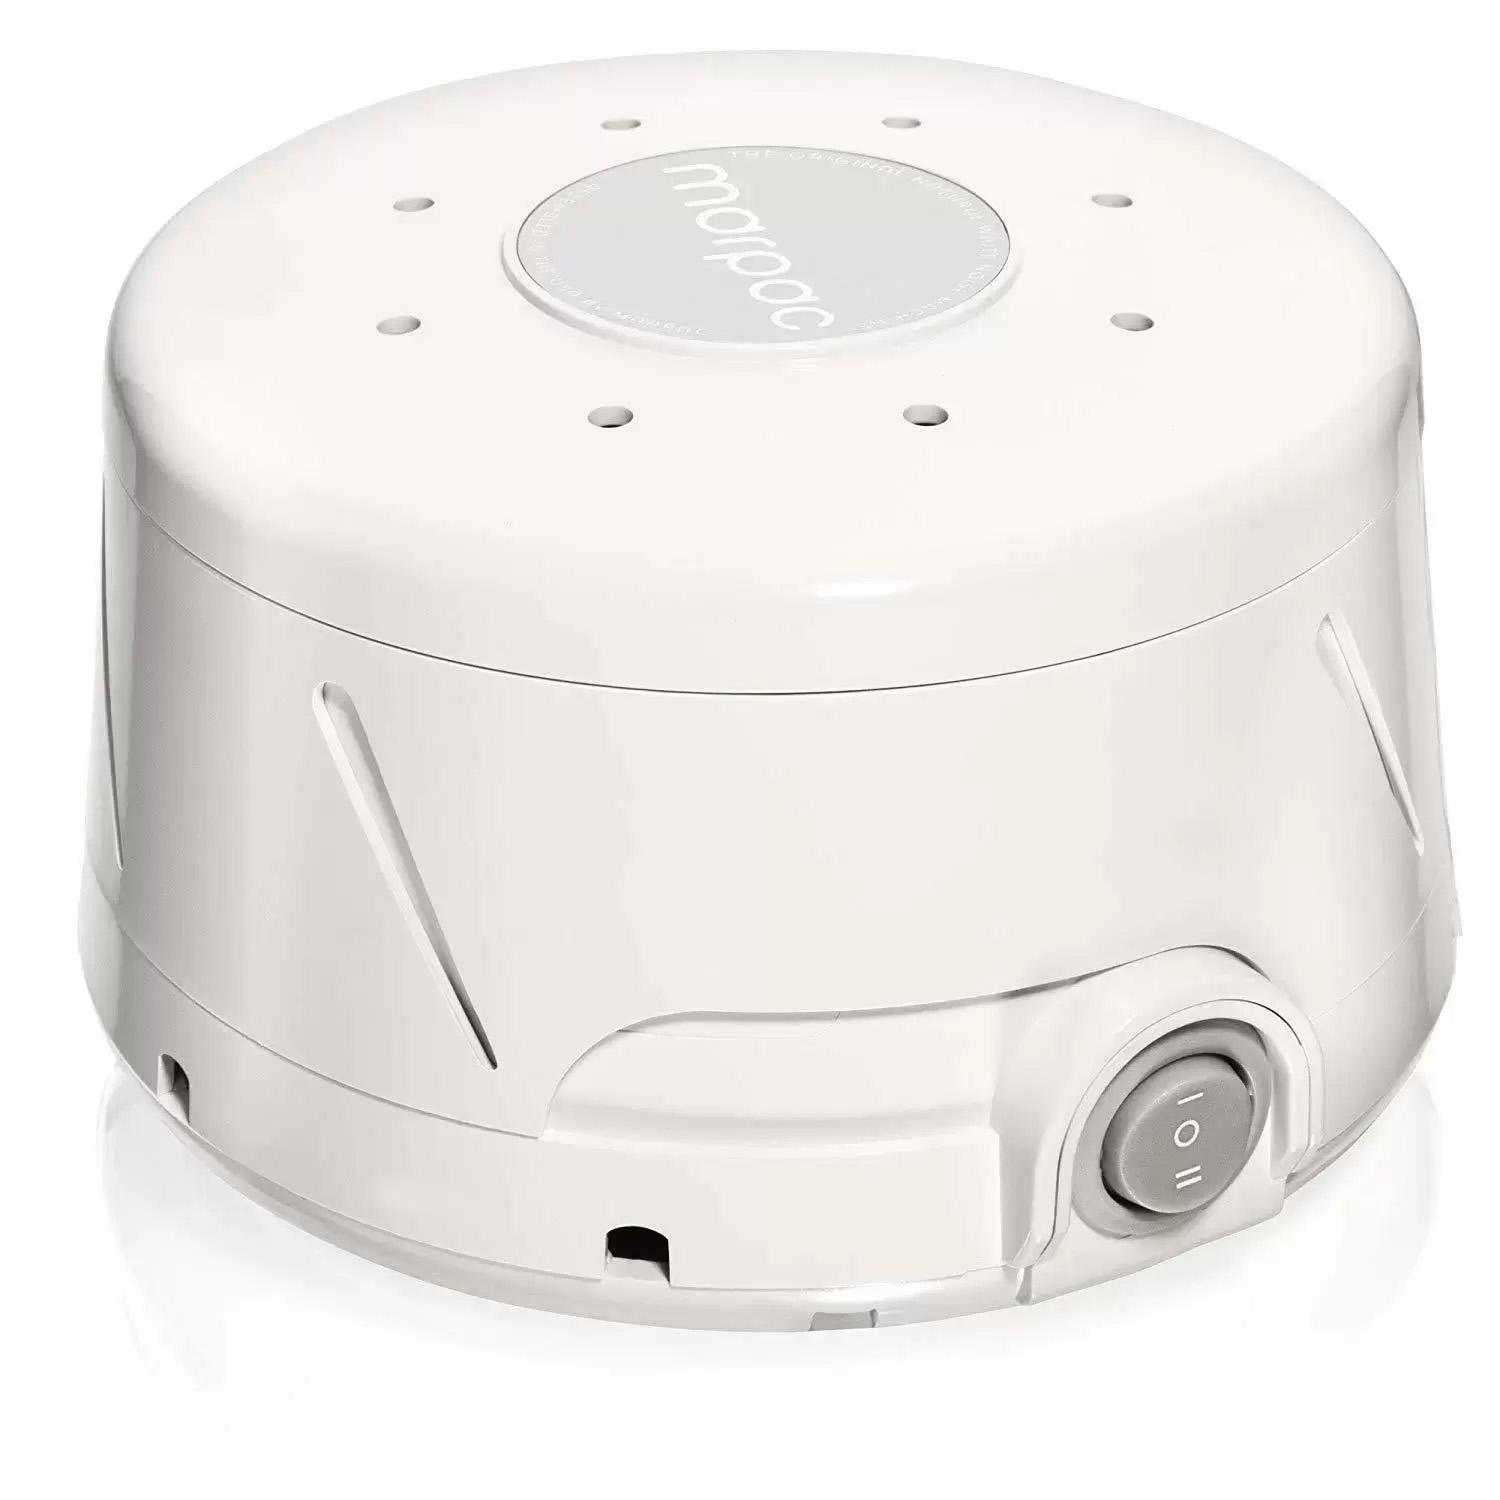 Marpac Dohm Classic White Noise Sound Machine for $31.47 Shipped